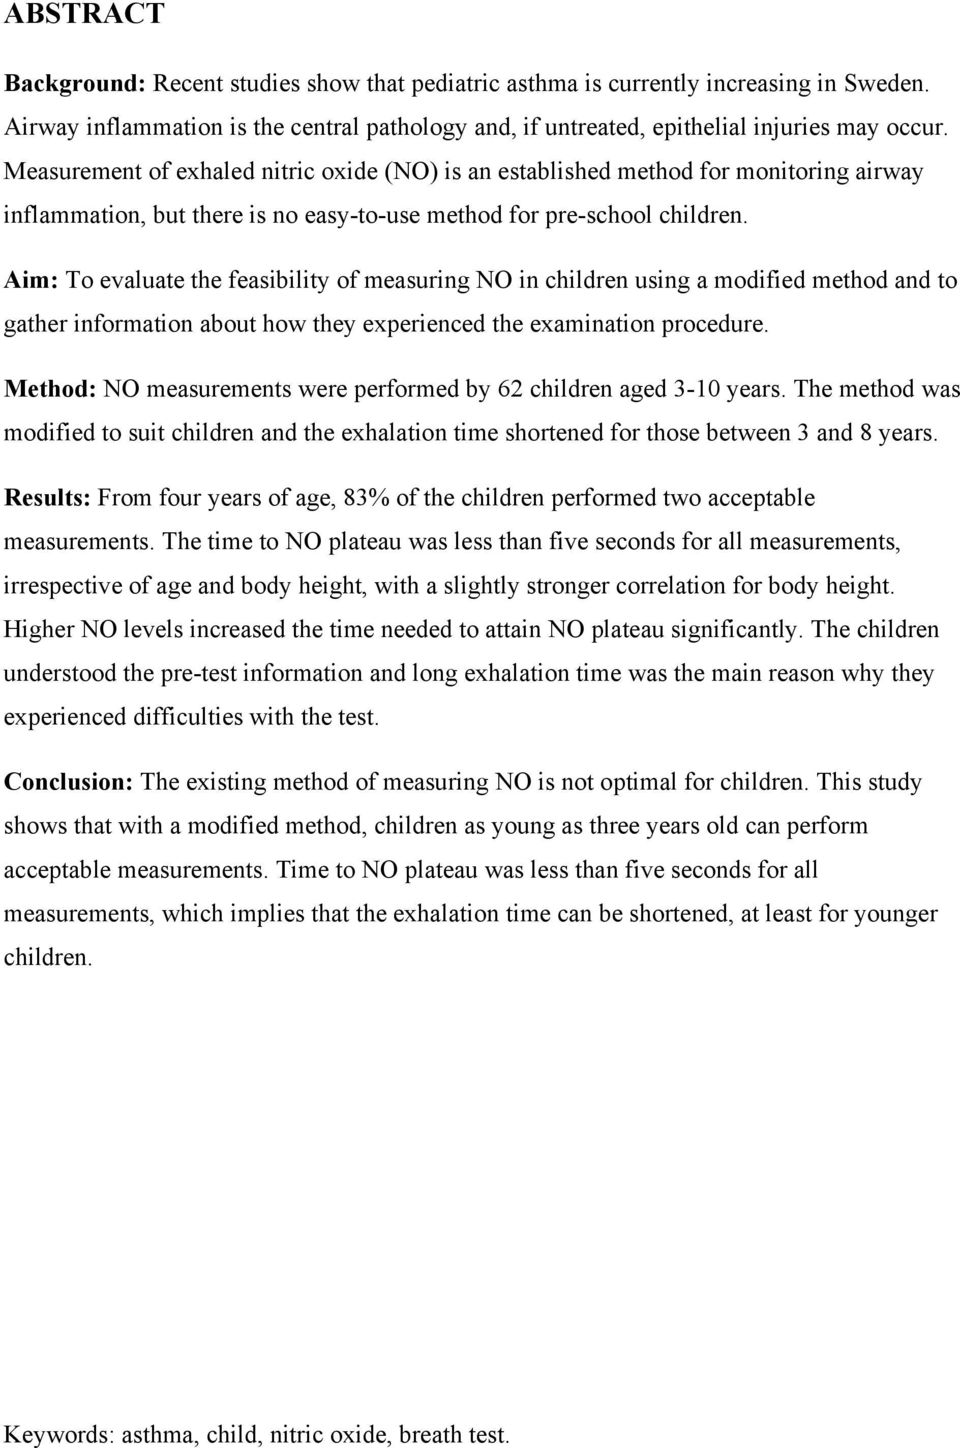 Aim: To evaluate the feasibility of measuring NO in children using a modified method and to gather information about how they experienced the examination procedure.